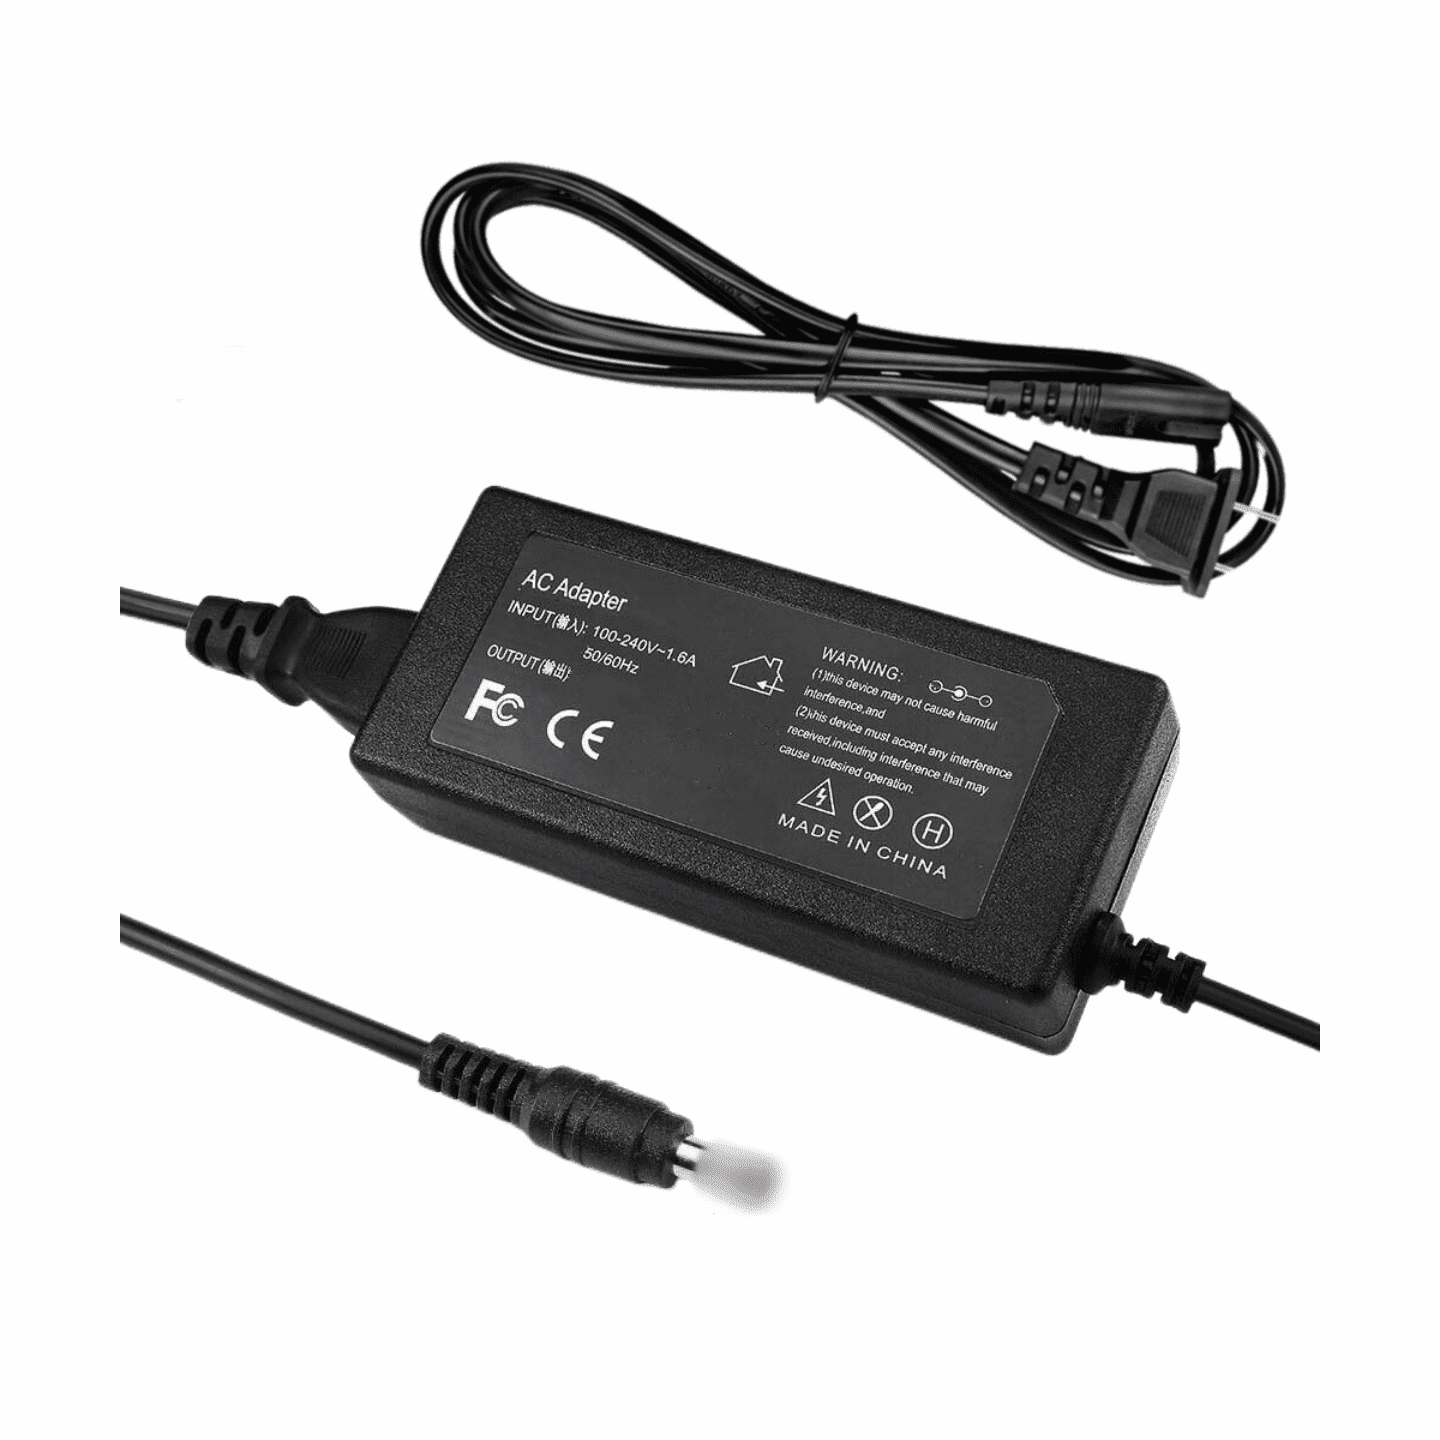 Klassiek Kan worden genegeerd Grote waanidee Kircuit 12V AC/DC Adapter Compatible with MS MelodySusie 71-7148-104  VIOLETILLY 48W Pro48W LED Lamp Nail Dryer Model: DR-6340 DR6340 Melody Susie  12VDC DC12V 12.0V Power Supply Charger - Walmart.com